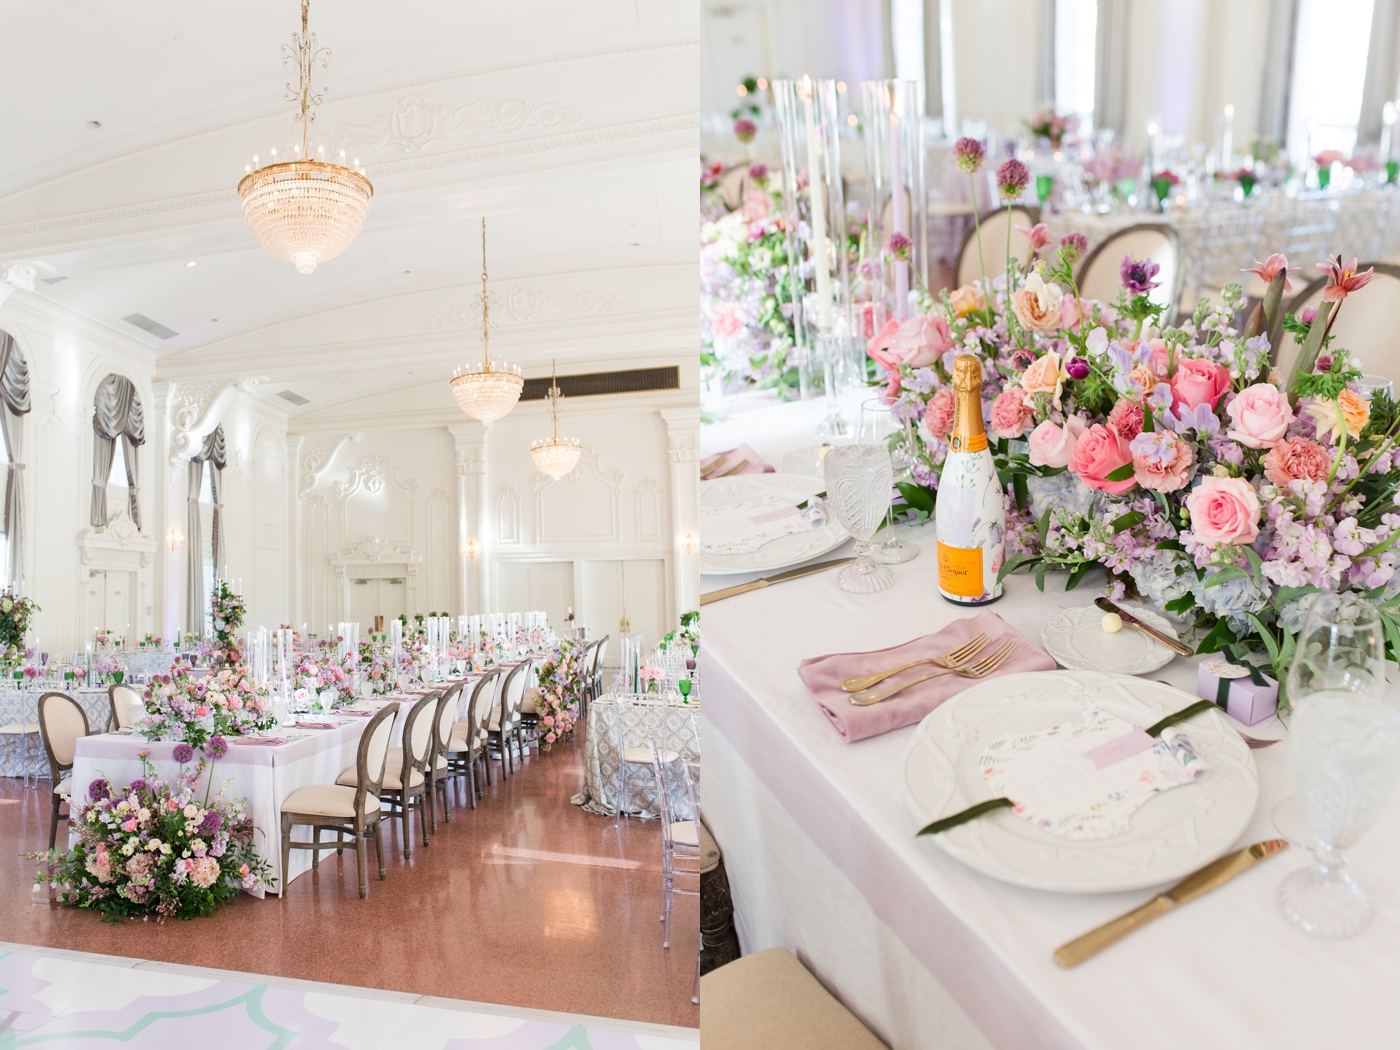 Garden inspired wedding with lilac linens, floral venues, and pastel flowers